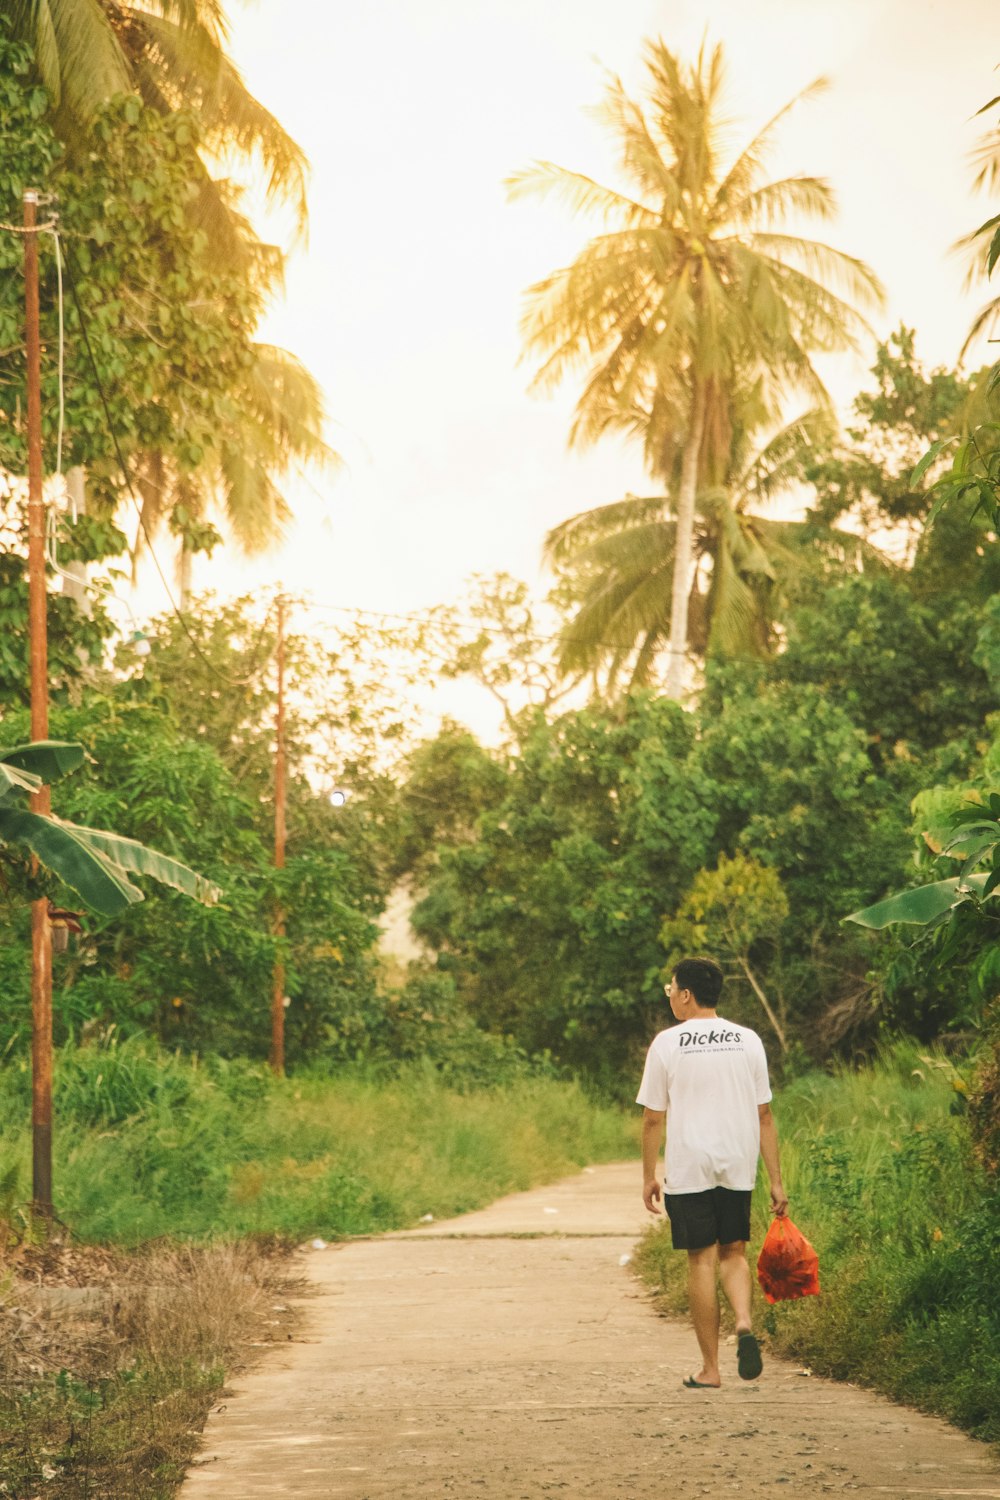 a man walking down a dirt road holding a red frisbee